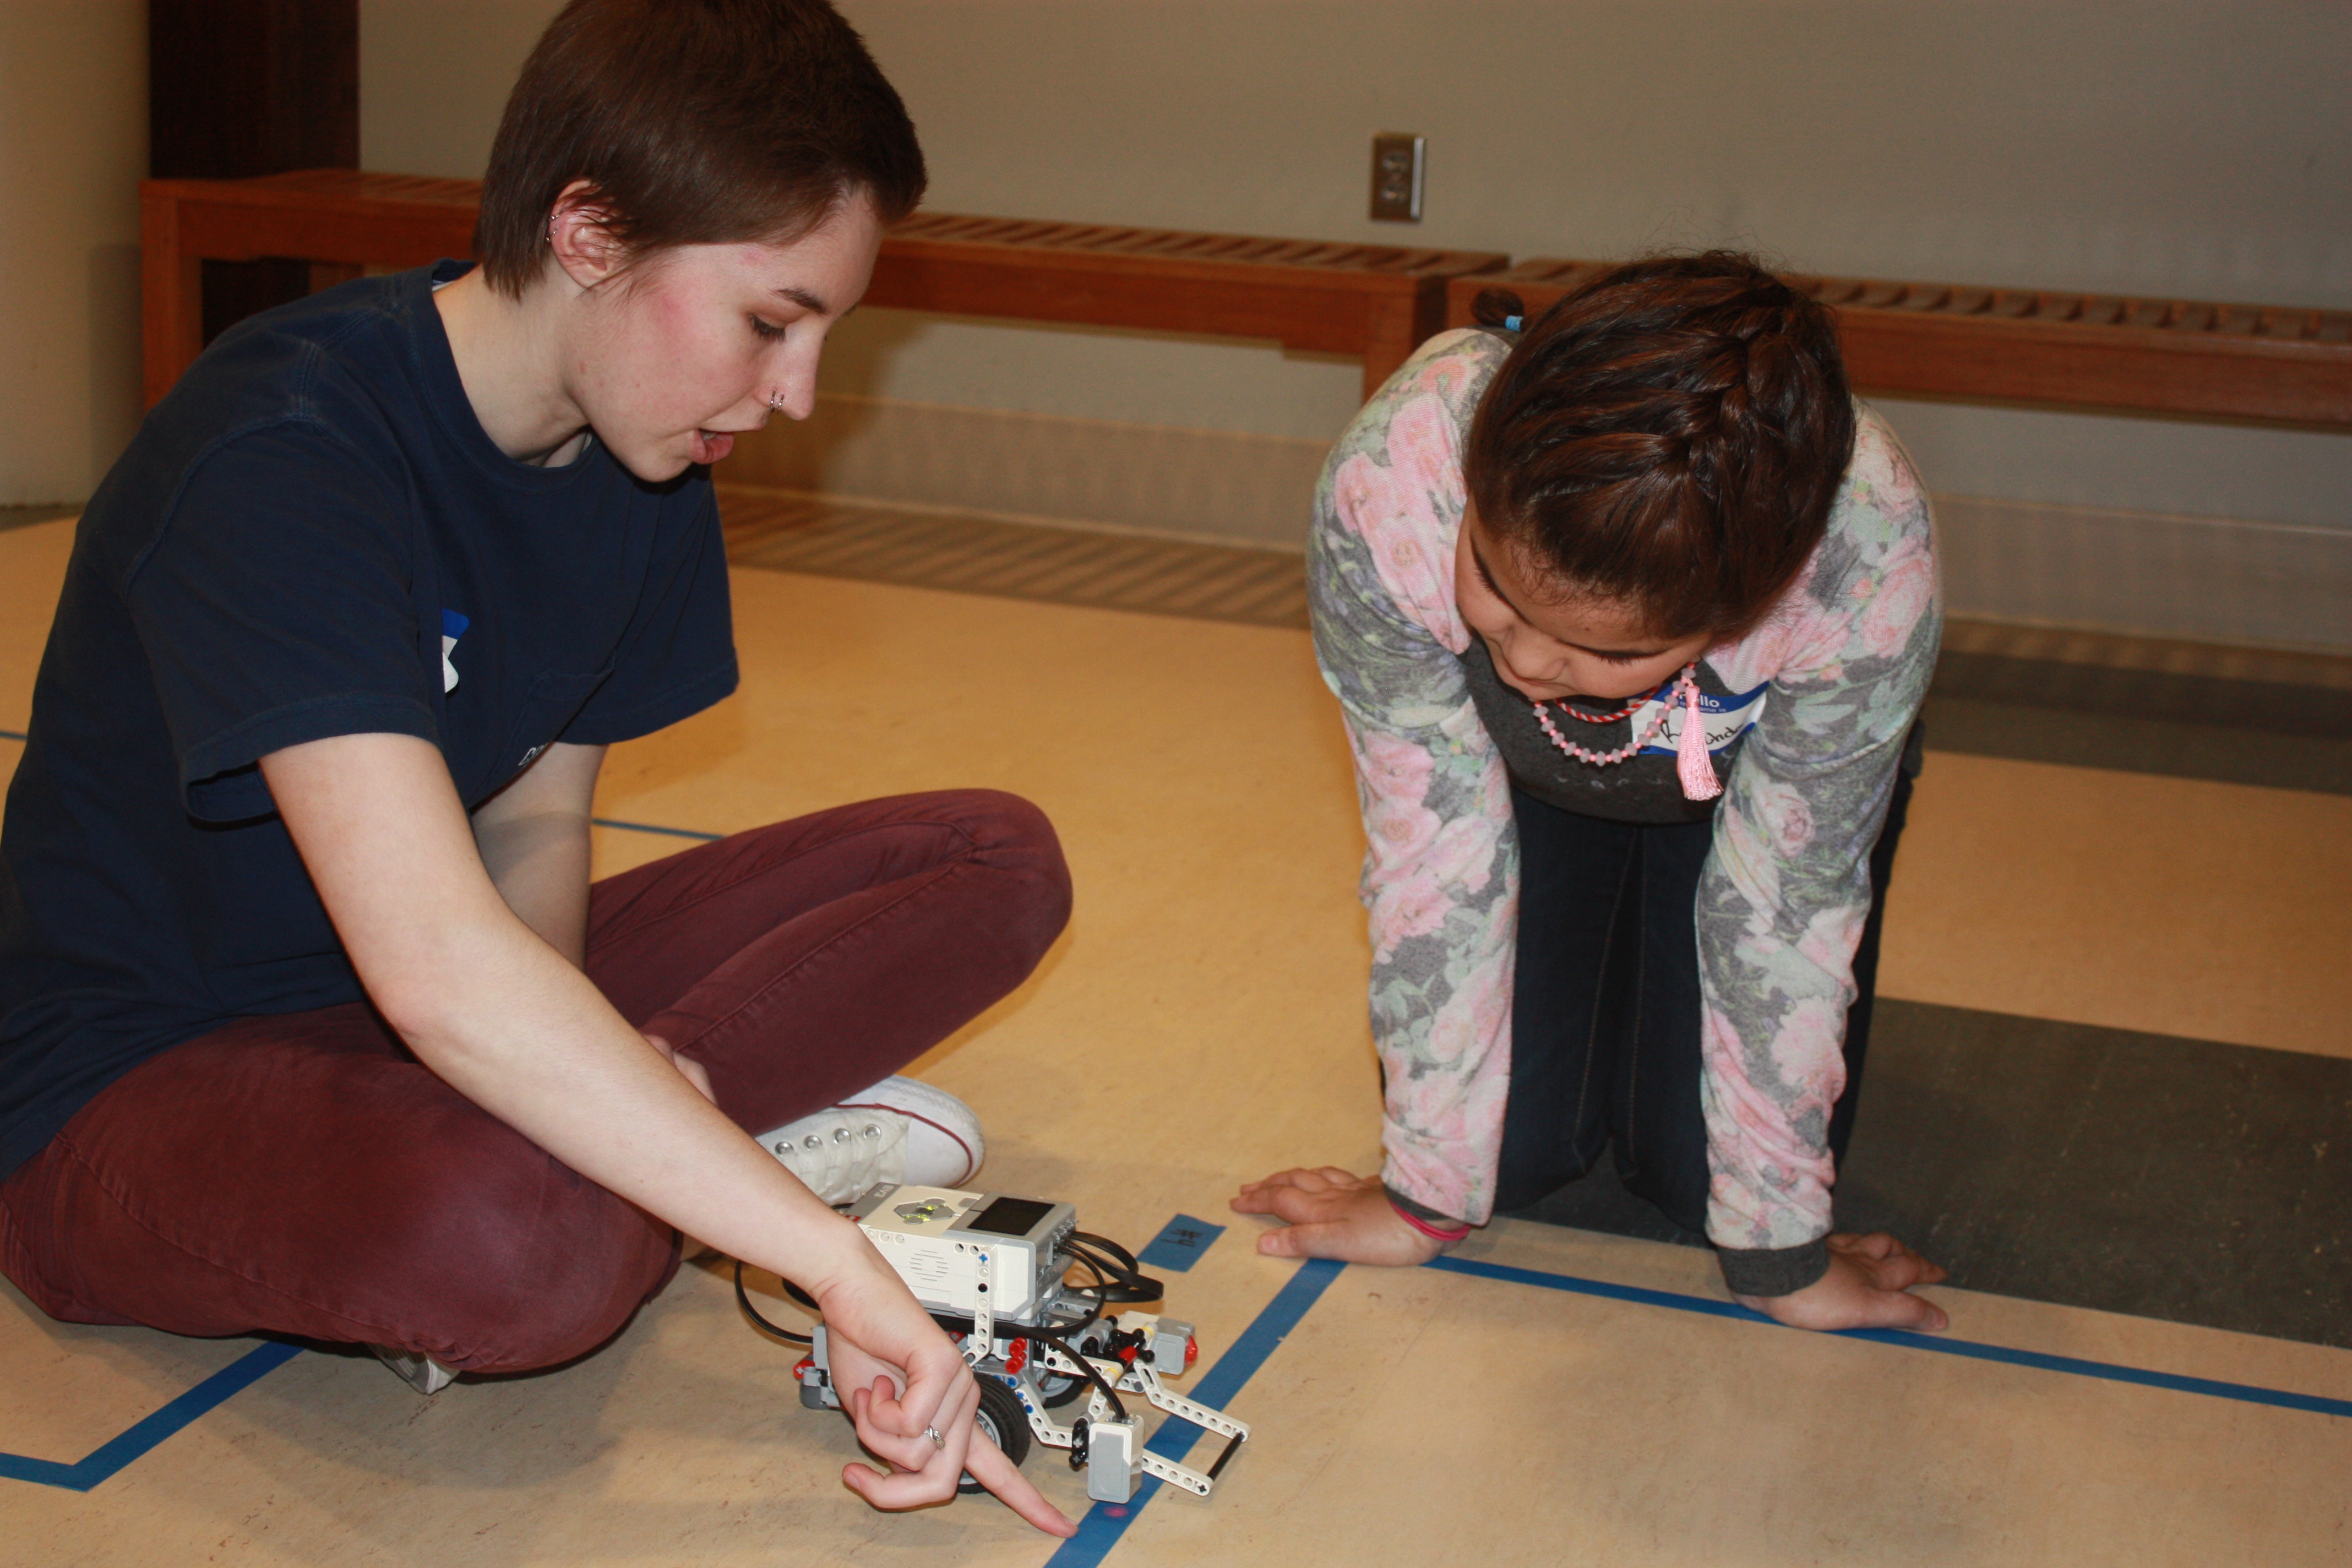 Computing for All member Allison Buckley helps a Girl Scout program a robot at last month's Girl Scout camp.